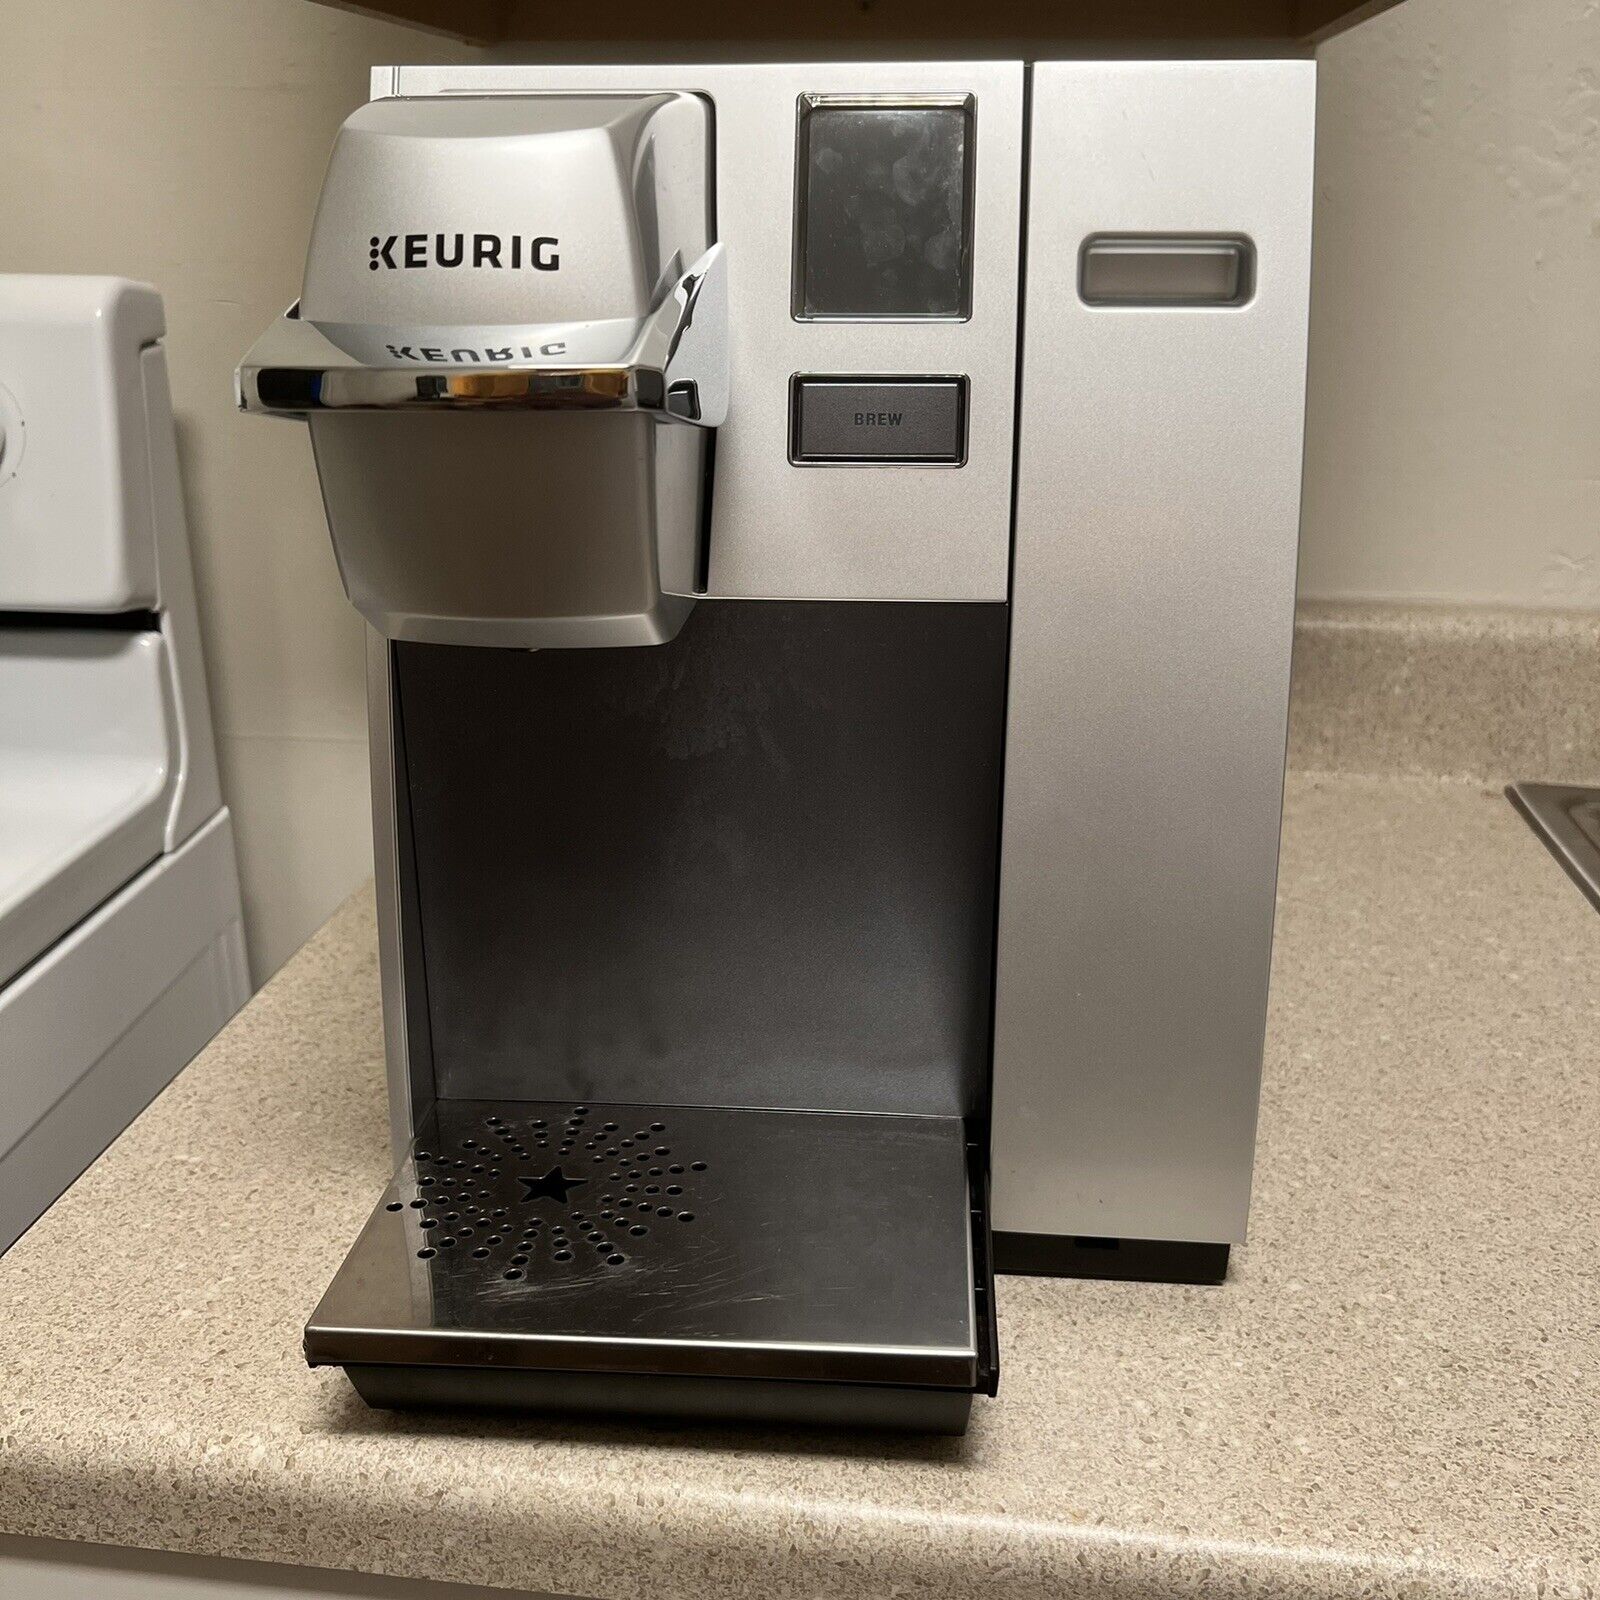 Keurig K155 Office Pro Commercial K-cup Coffee Maker - Silver